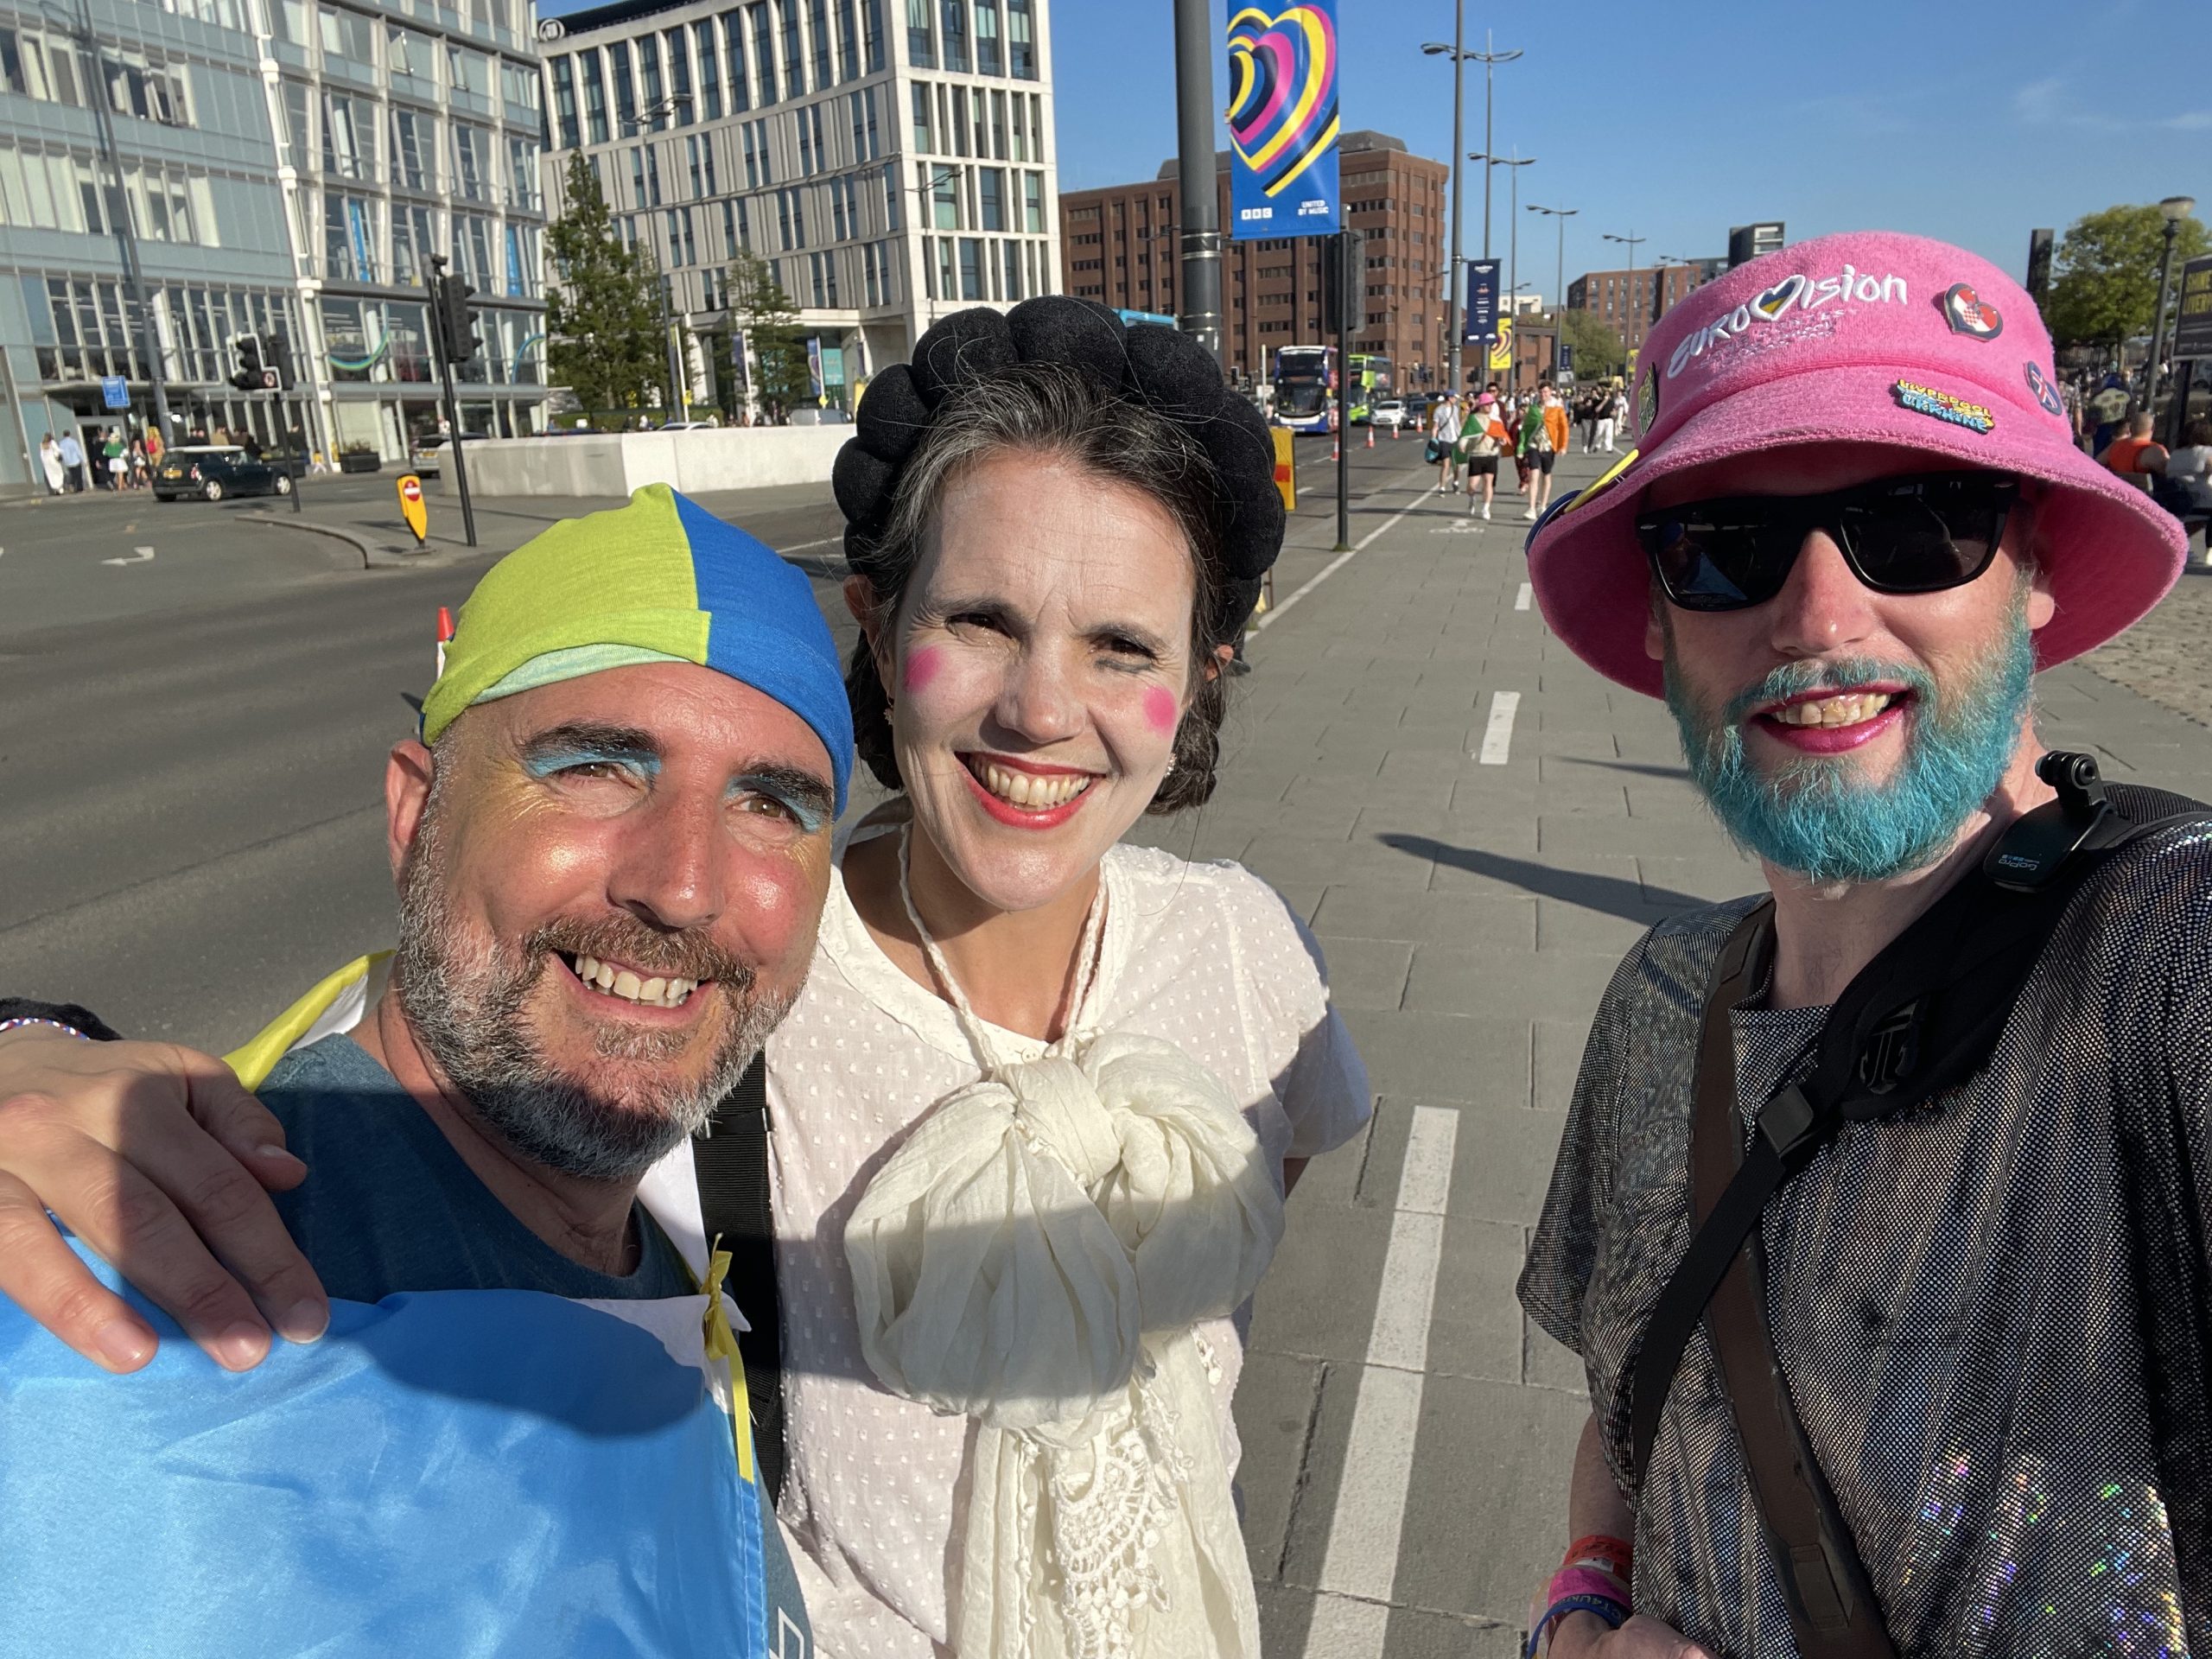 Non-binary person on the right in a sparkly dress, with blue beard and pink hat. Couple on the left in Ukrainian colours. Both smiling to camera.